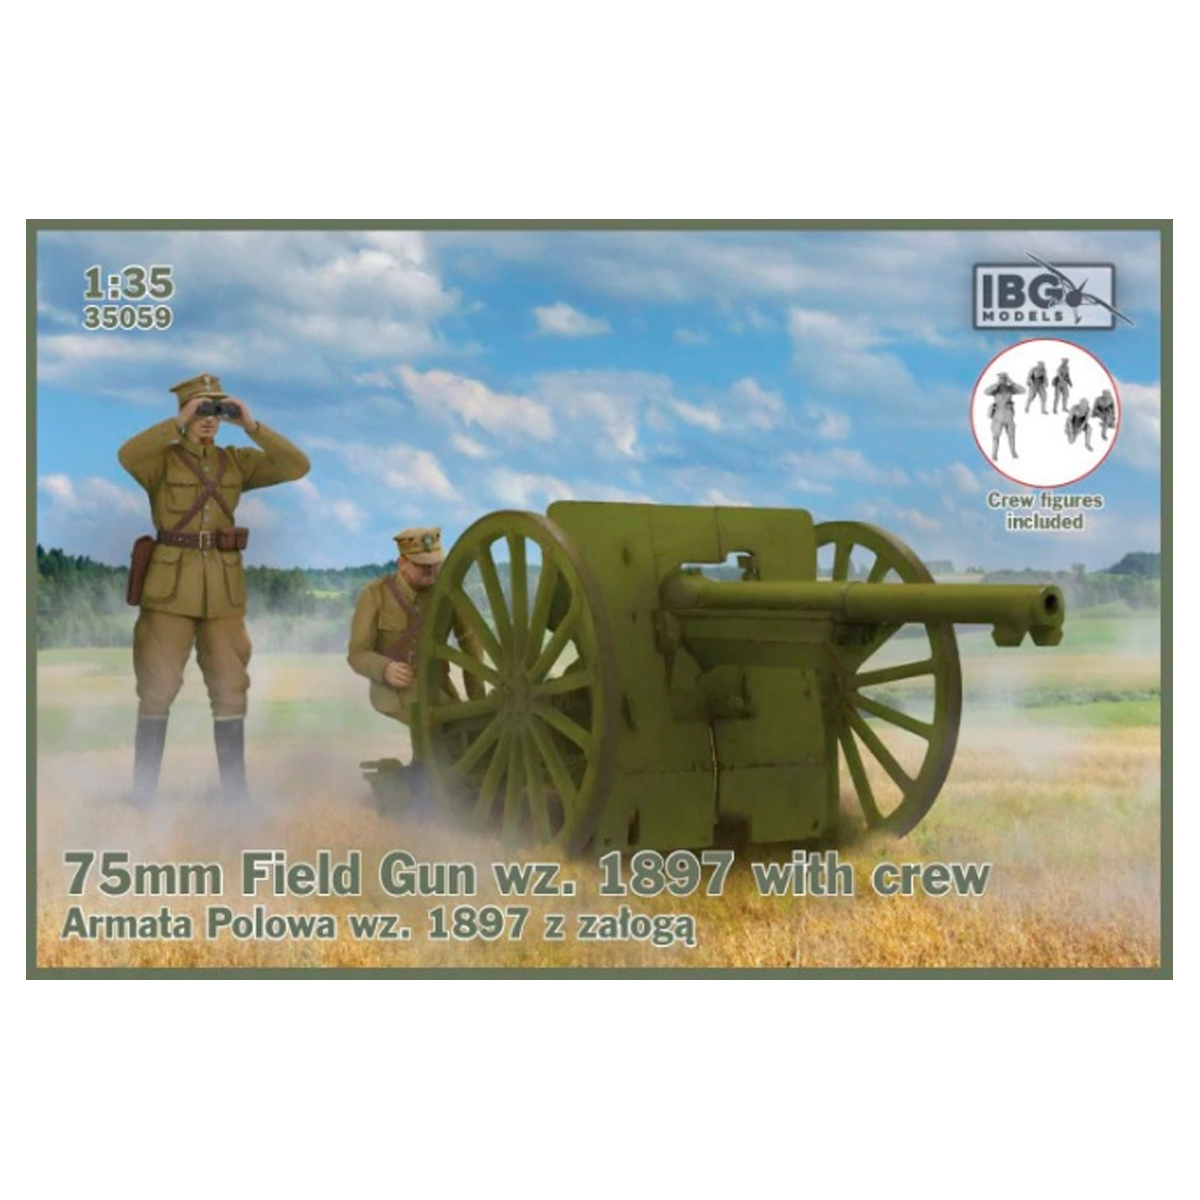 75mm Field Gun wz. 1896 with crew (5 figures included) 1/35